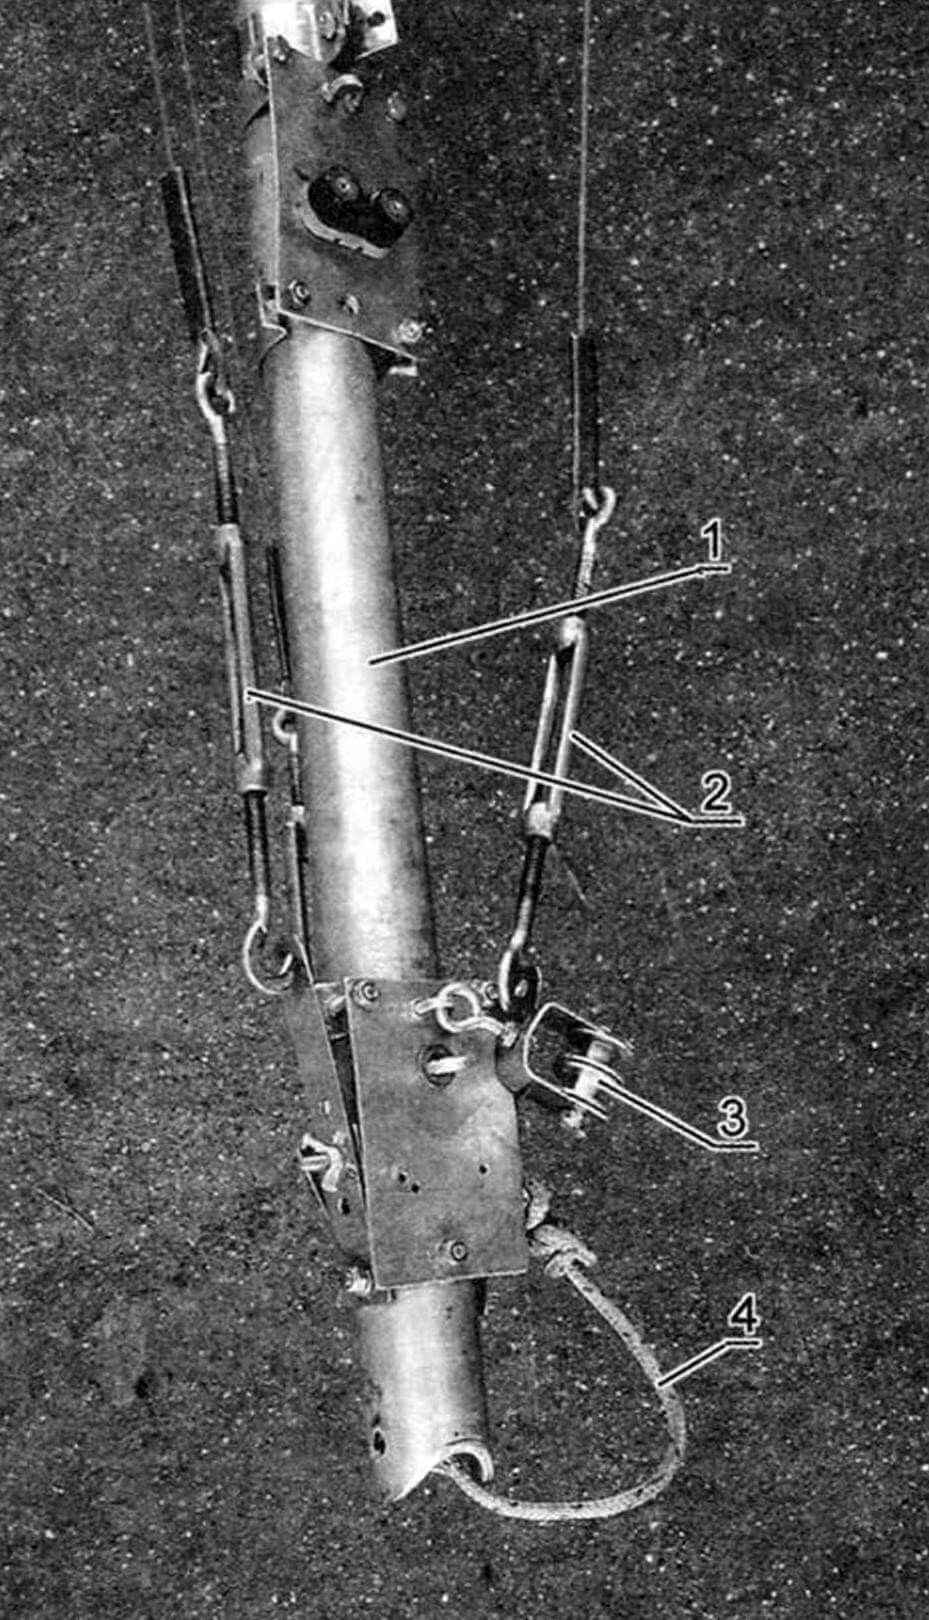 Mast spur (lower part of the mast)